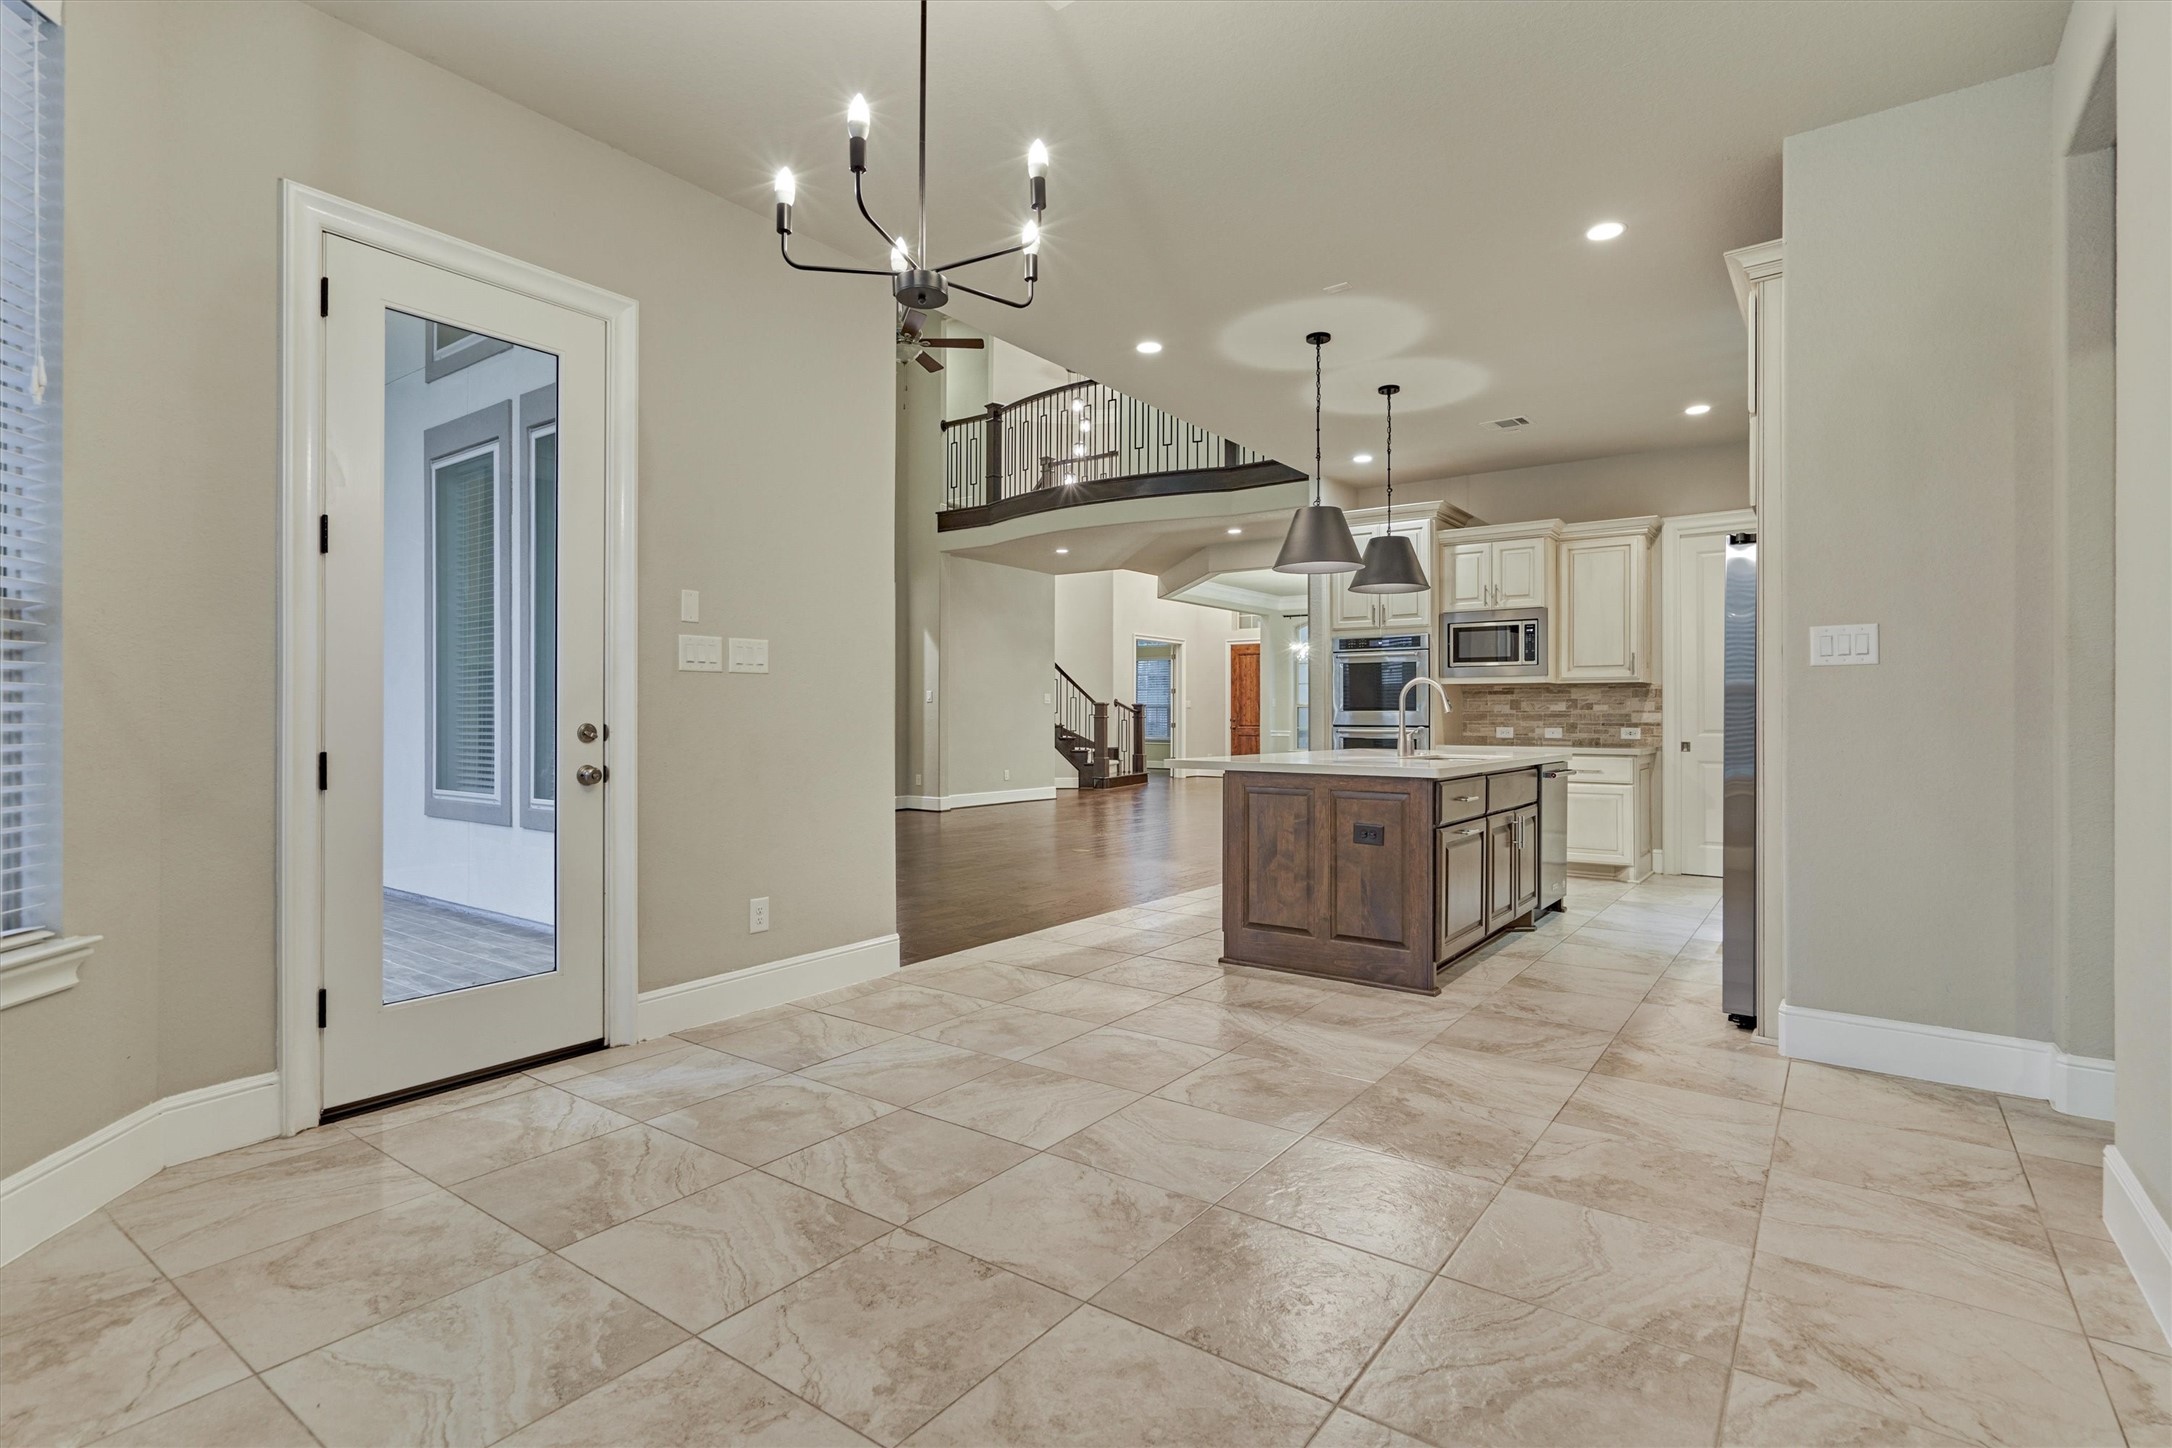 Neutral ceramic tile covers the kitchen and breakfast nook floors.
